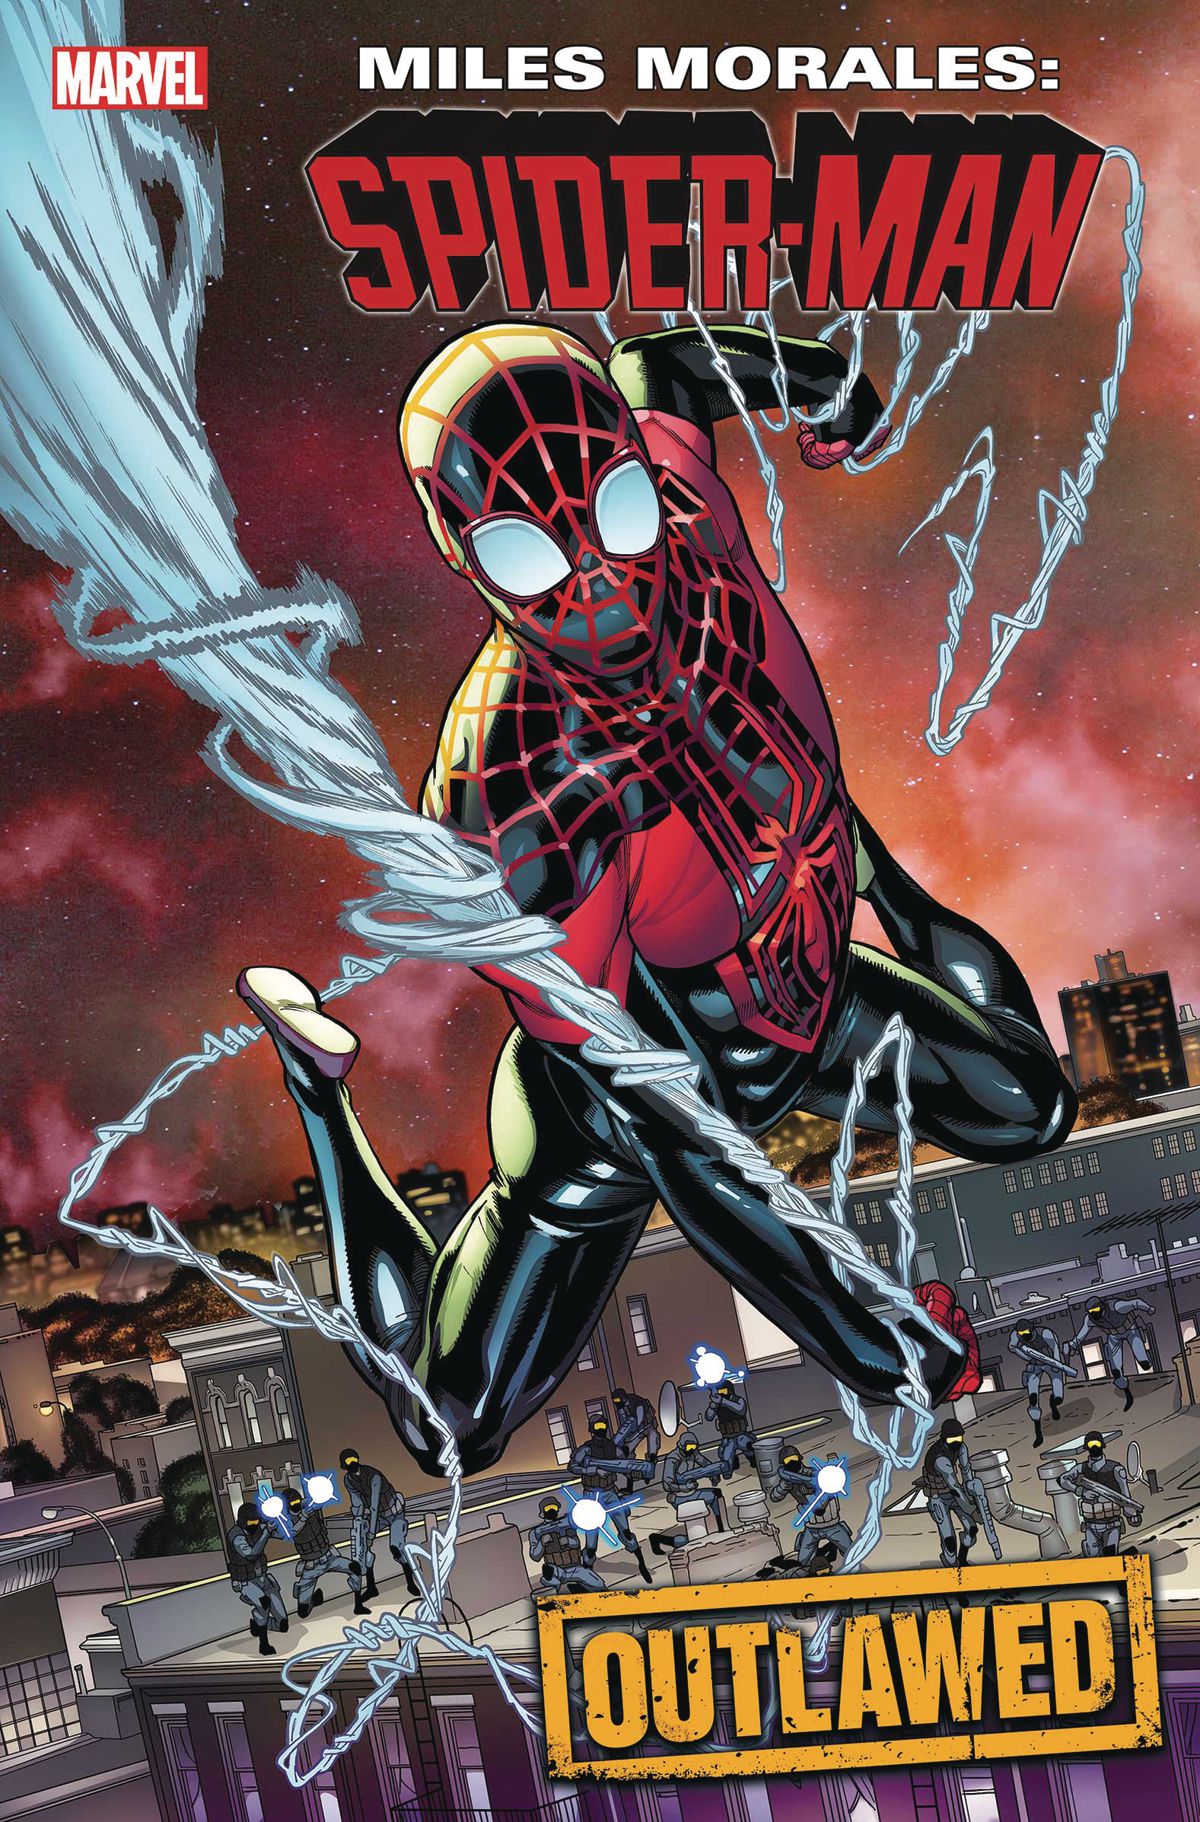 Miles Morales/Spider-Man swings through city streets under fire from soldiers on the cover of Miles Morales: Spider-Man #17, Marvel Comics (2020). 